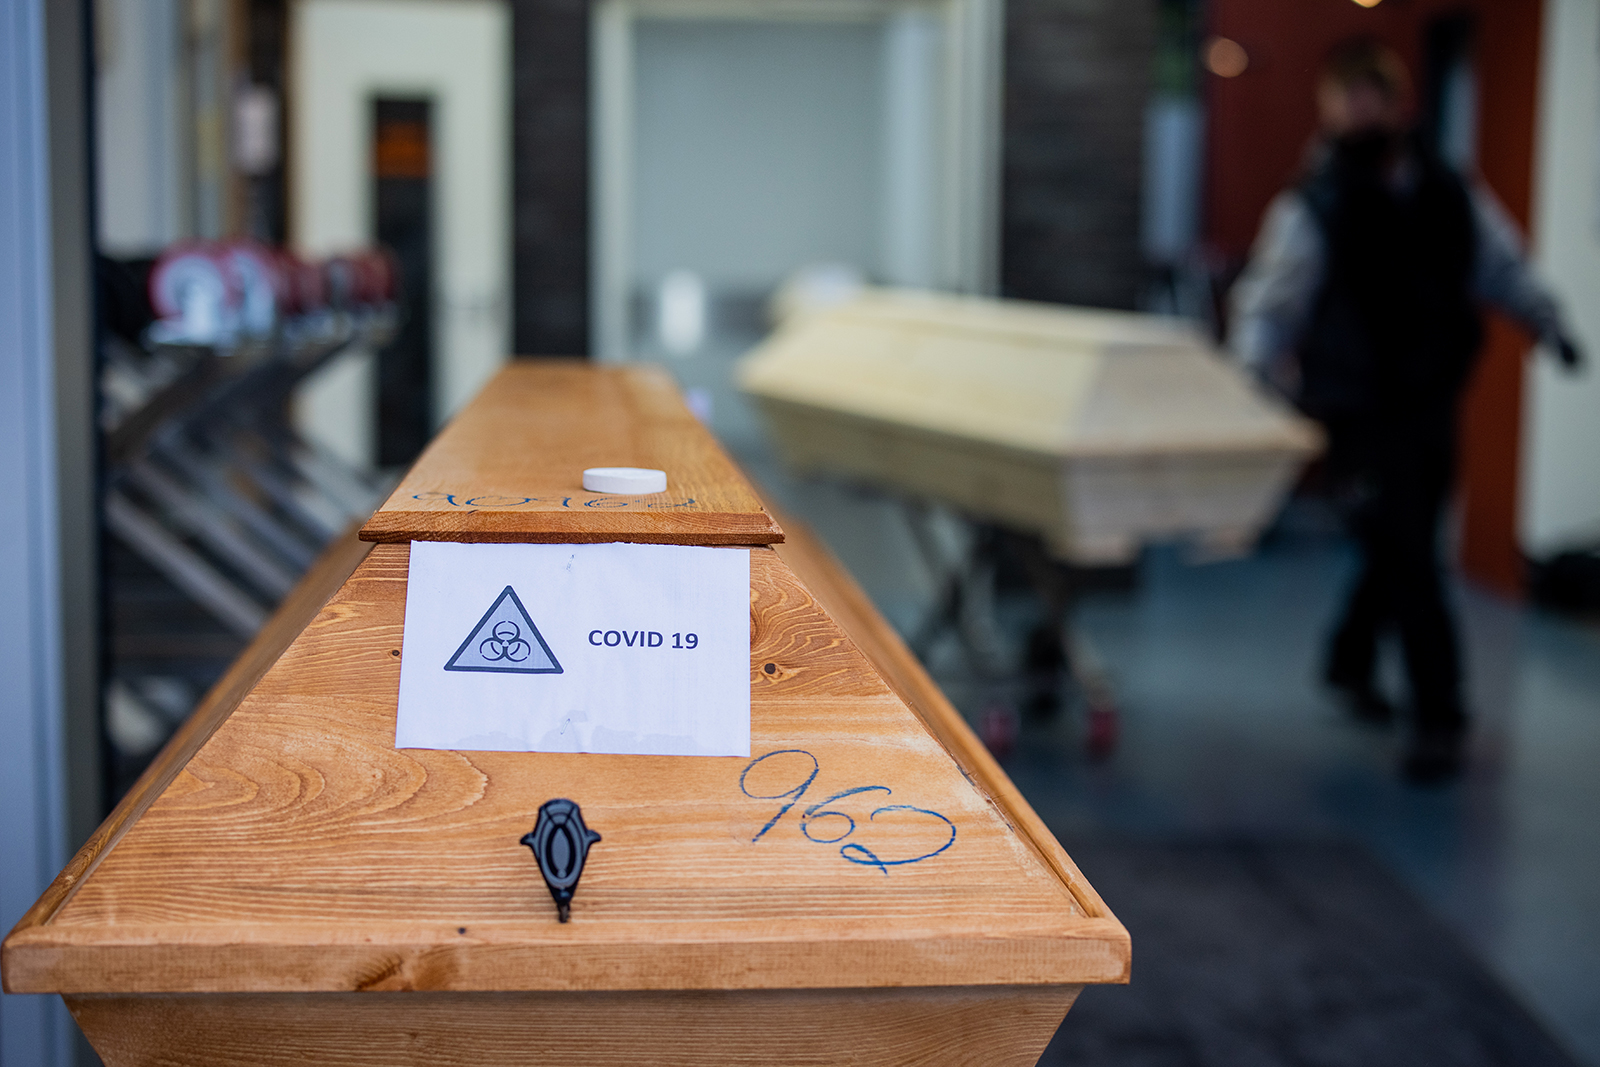 A coffin labeled "Biohazard Covid-19" is seen at a crematorium in Dülman, Germany, on January 19.